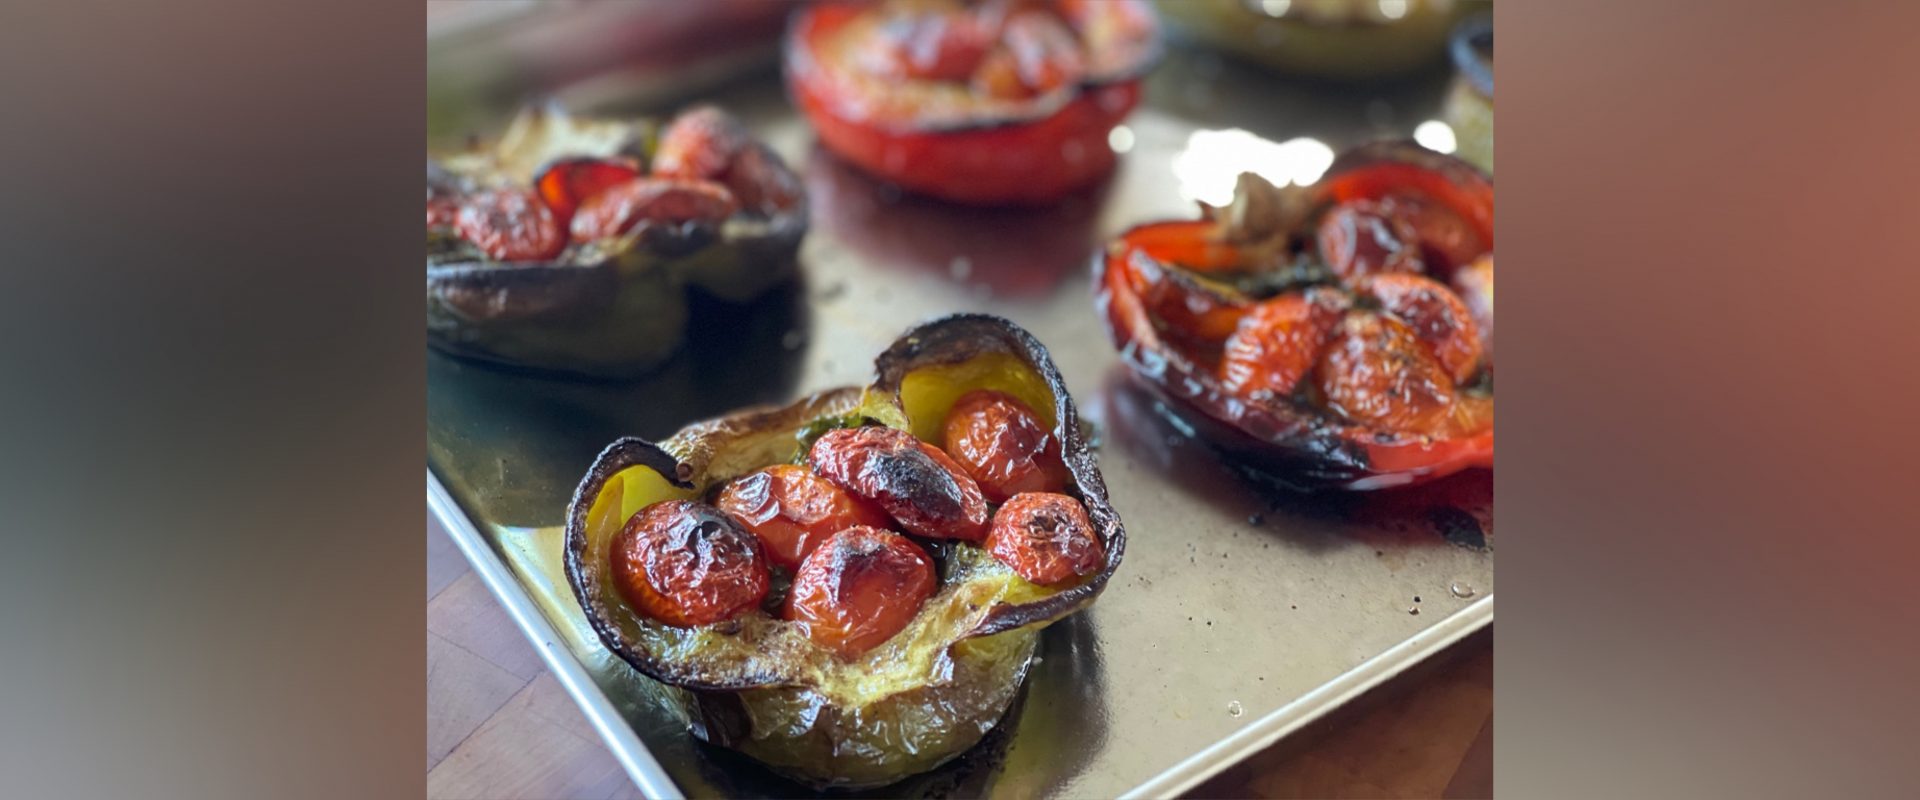 Permalink to: Roasted Stuffed Peppers